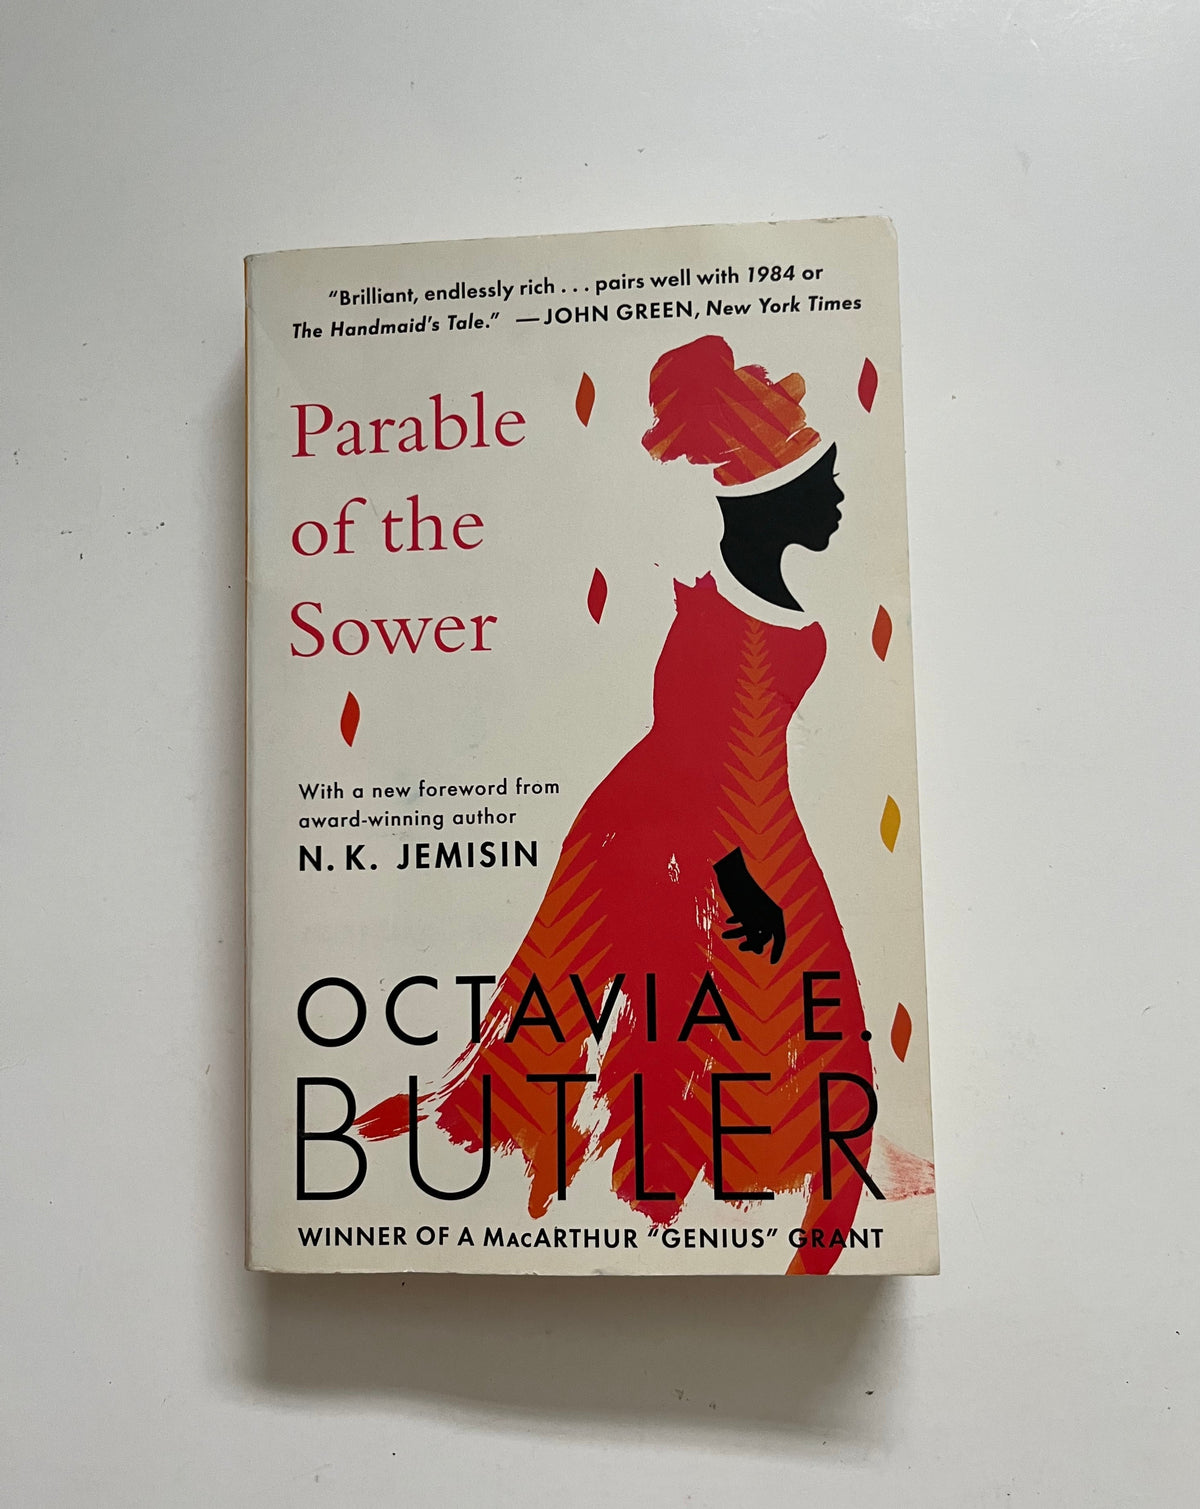 Parable of the Sower by Octavia Butler